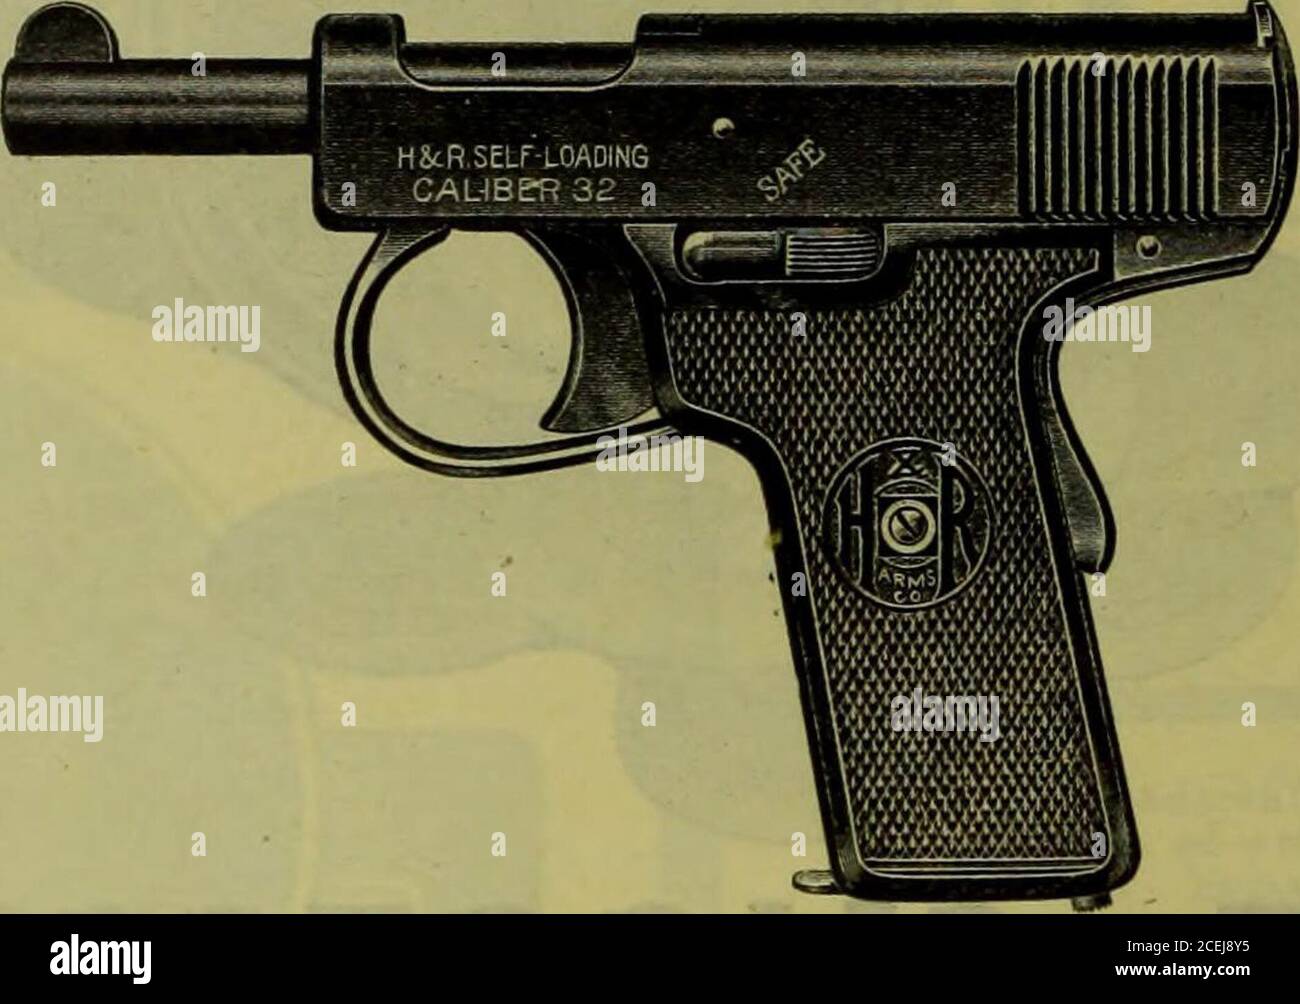 Hardware merchandising March-June 1919. ICO HARDWARE AND METAL—Motor  Accessories, Bicycles and Sporting Goods Section. April 5, 1919 ANNOUNCING  THE H & R Self-Loading (Automatic) Pistol Caliber .32 (765 M/M). A  hammerless